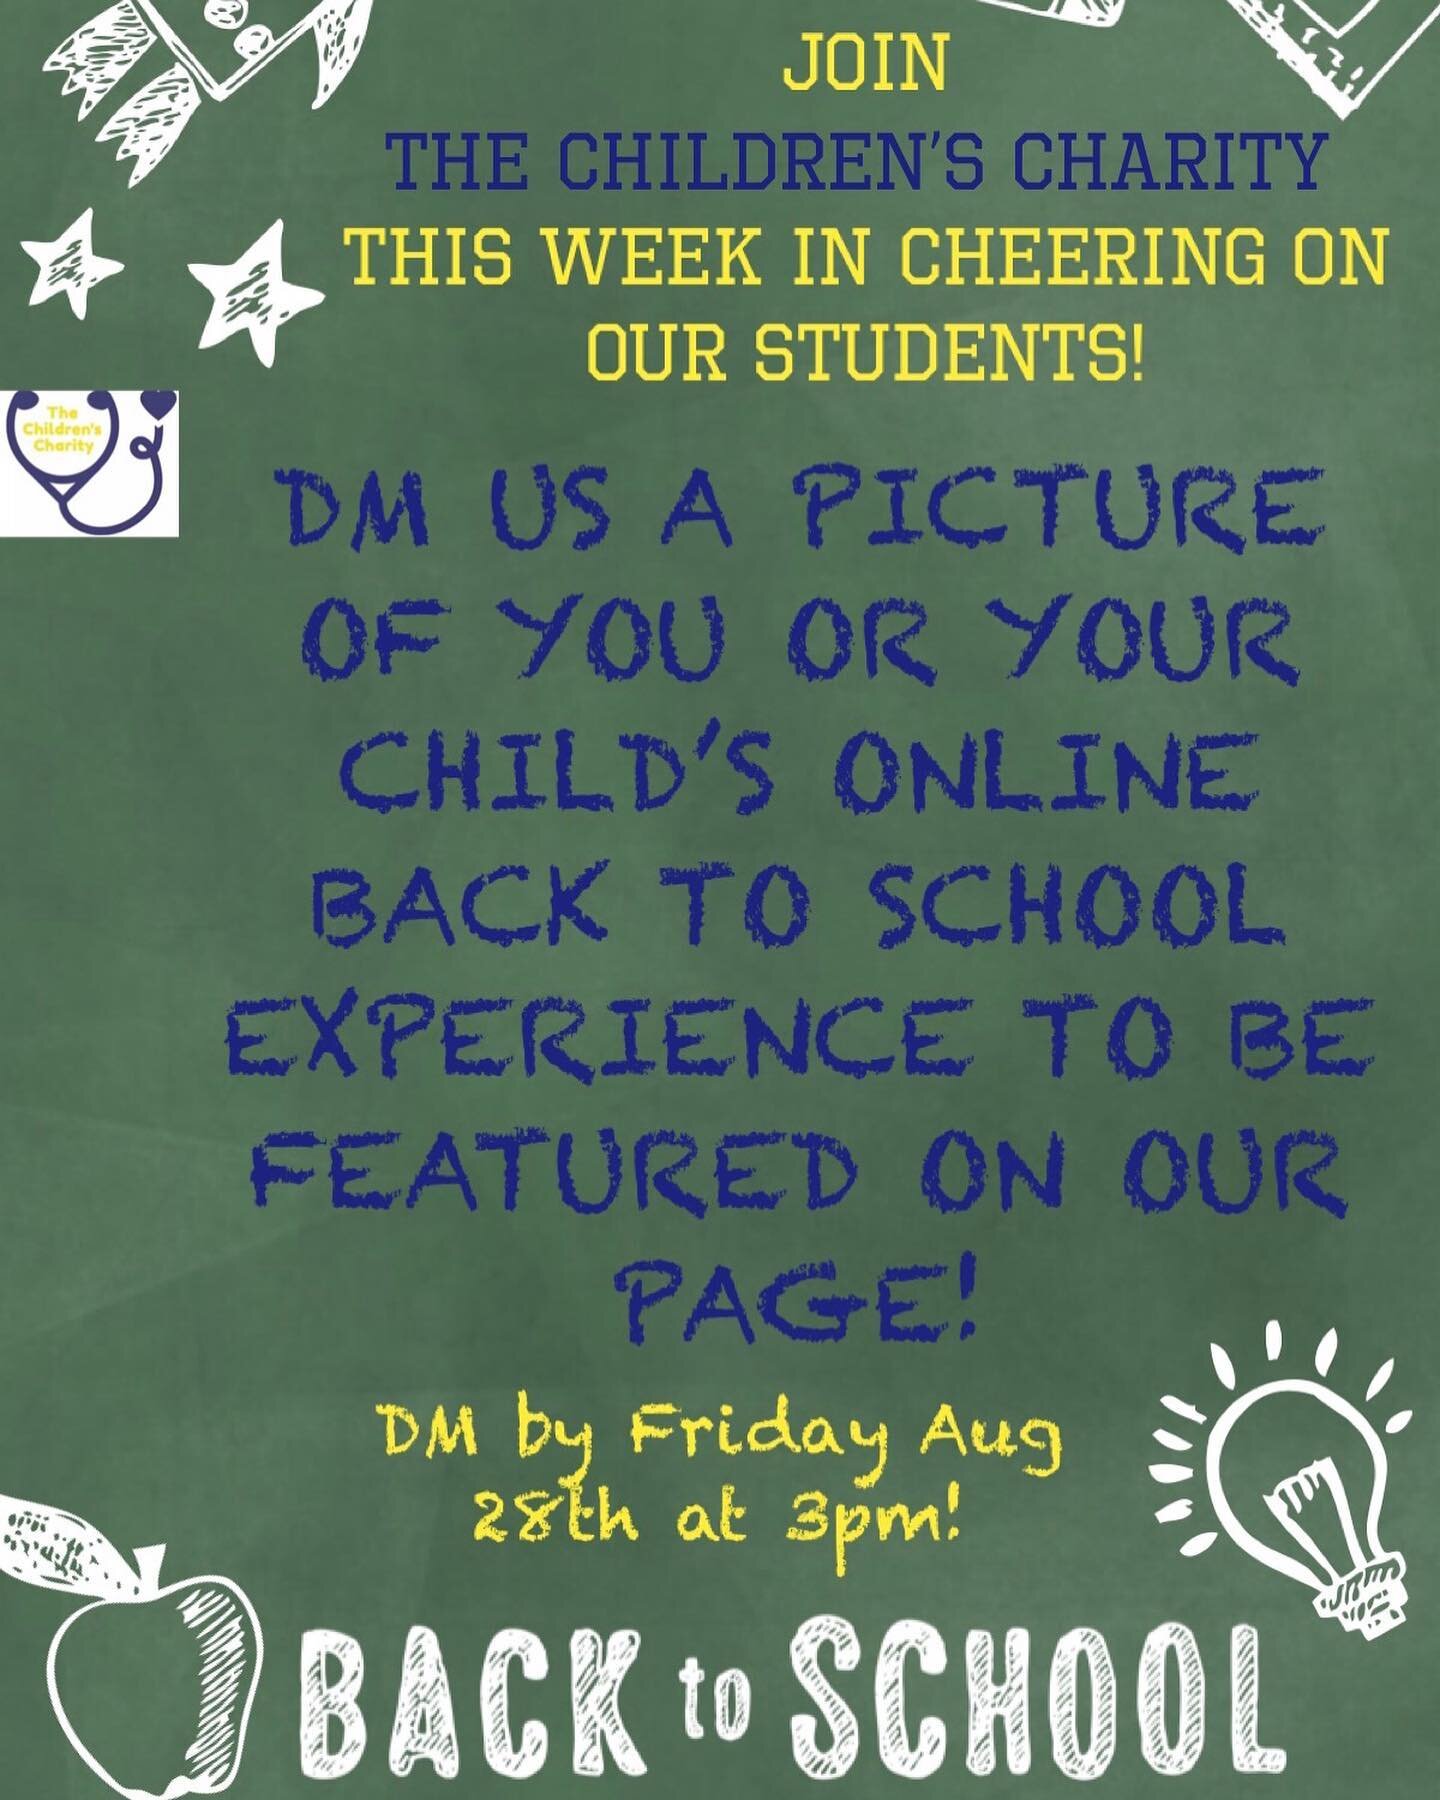 Good morning!!☀️ Best of luck to all students starting class today!🍀This week we want to focus on our students, so from now to Friday send us a picture of you or your child&rsquo;s at home back to school experience! Here are some helpful tips for ou